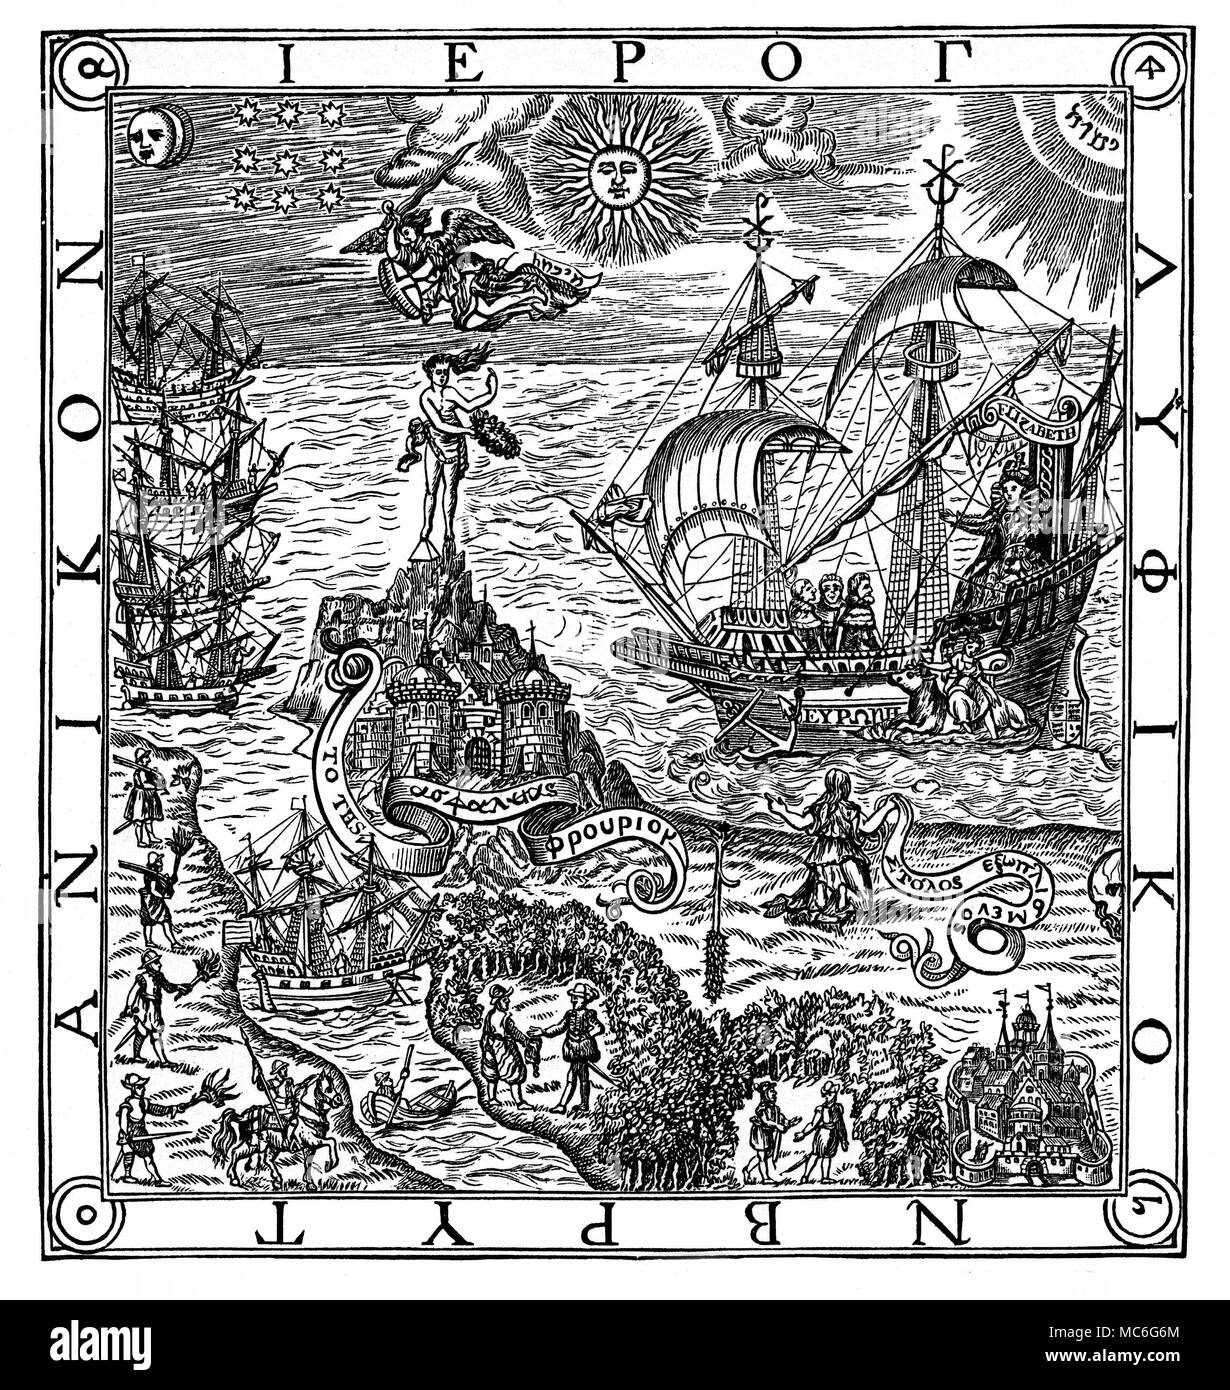 SYMBOLS - HIEROGLYPHICS 'A hieroglyphic of Britain' - the frontispiece to Dr. John Dee, Arte of Navigation, 1577. The image is more a hieroglyphic of Queen Elizabeth, than of Britain. She sits in state on a boat, alongside which is Europa, being carried on the back of a bull. She is sailing towards the personification of Good Fortune, who stands with her right foot on a pyramid. From John Richard Green, A Short History of the English People, 1902 edn. Stock Photo